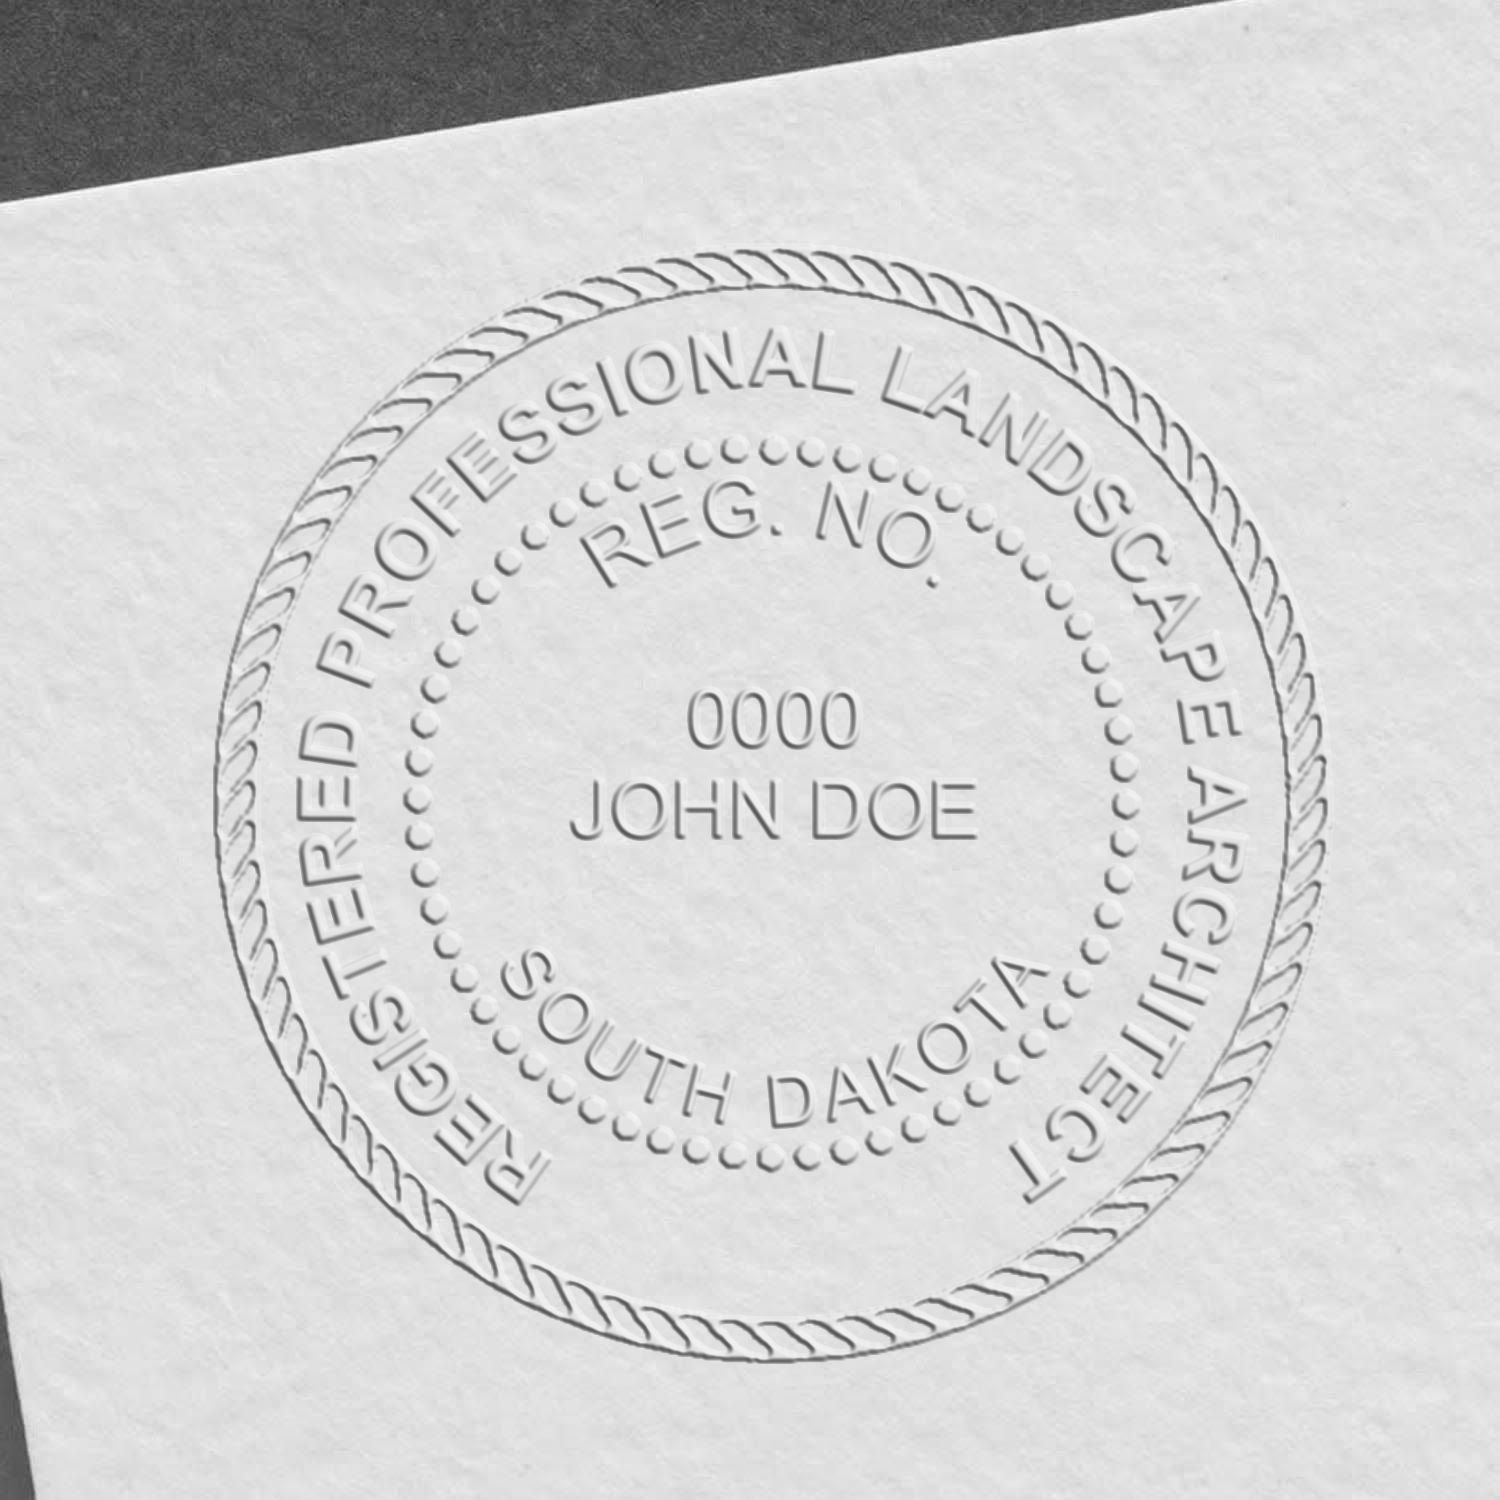 A photograph of the Hybrid South Dakota Landscape Architect Seal stamp impression reveals a vivid, professional image of the on paper.